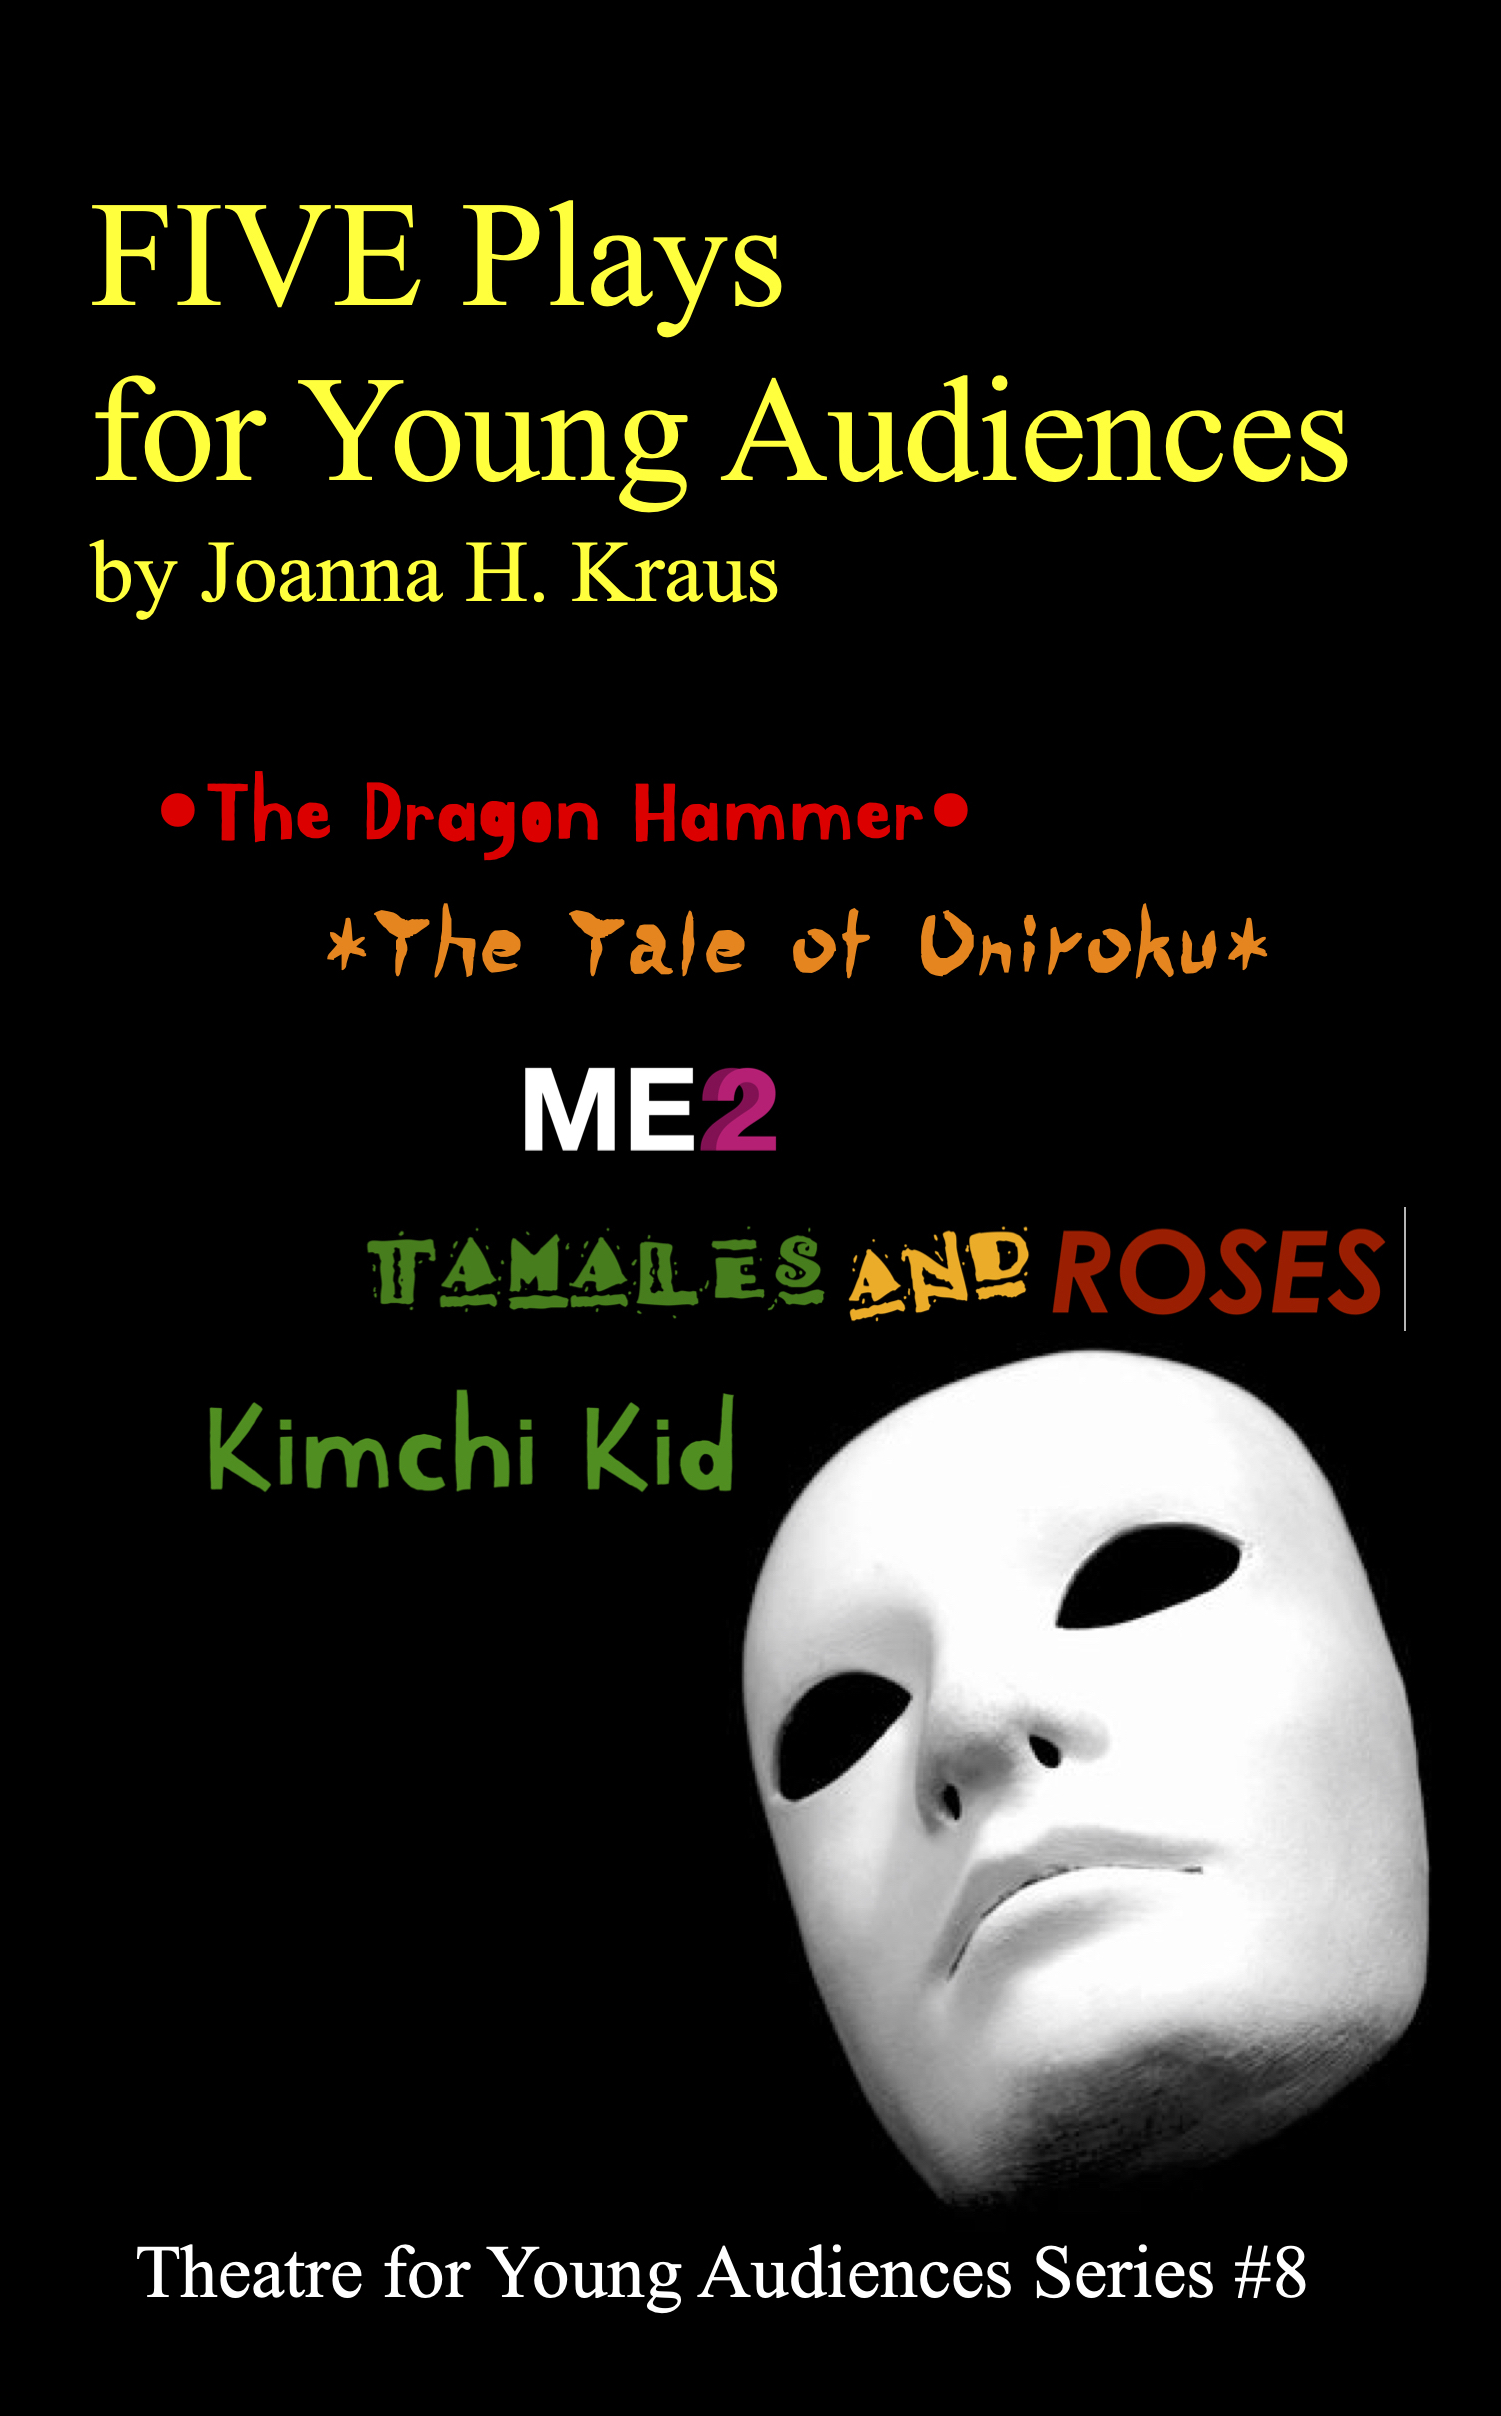 FIVE Plays for Young Audiences by Joanna H. Kraus • Volume 8 Theatre for Young Audiences Series